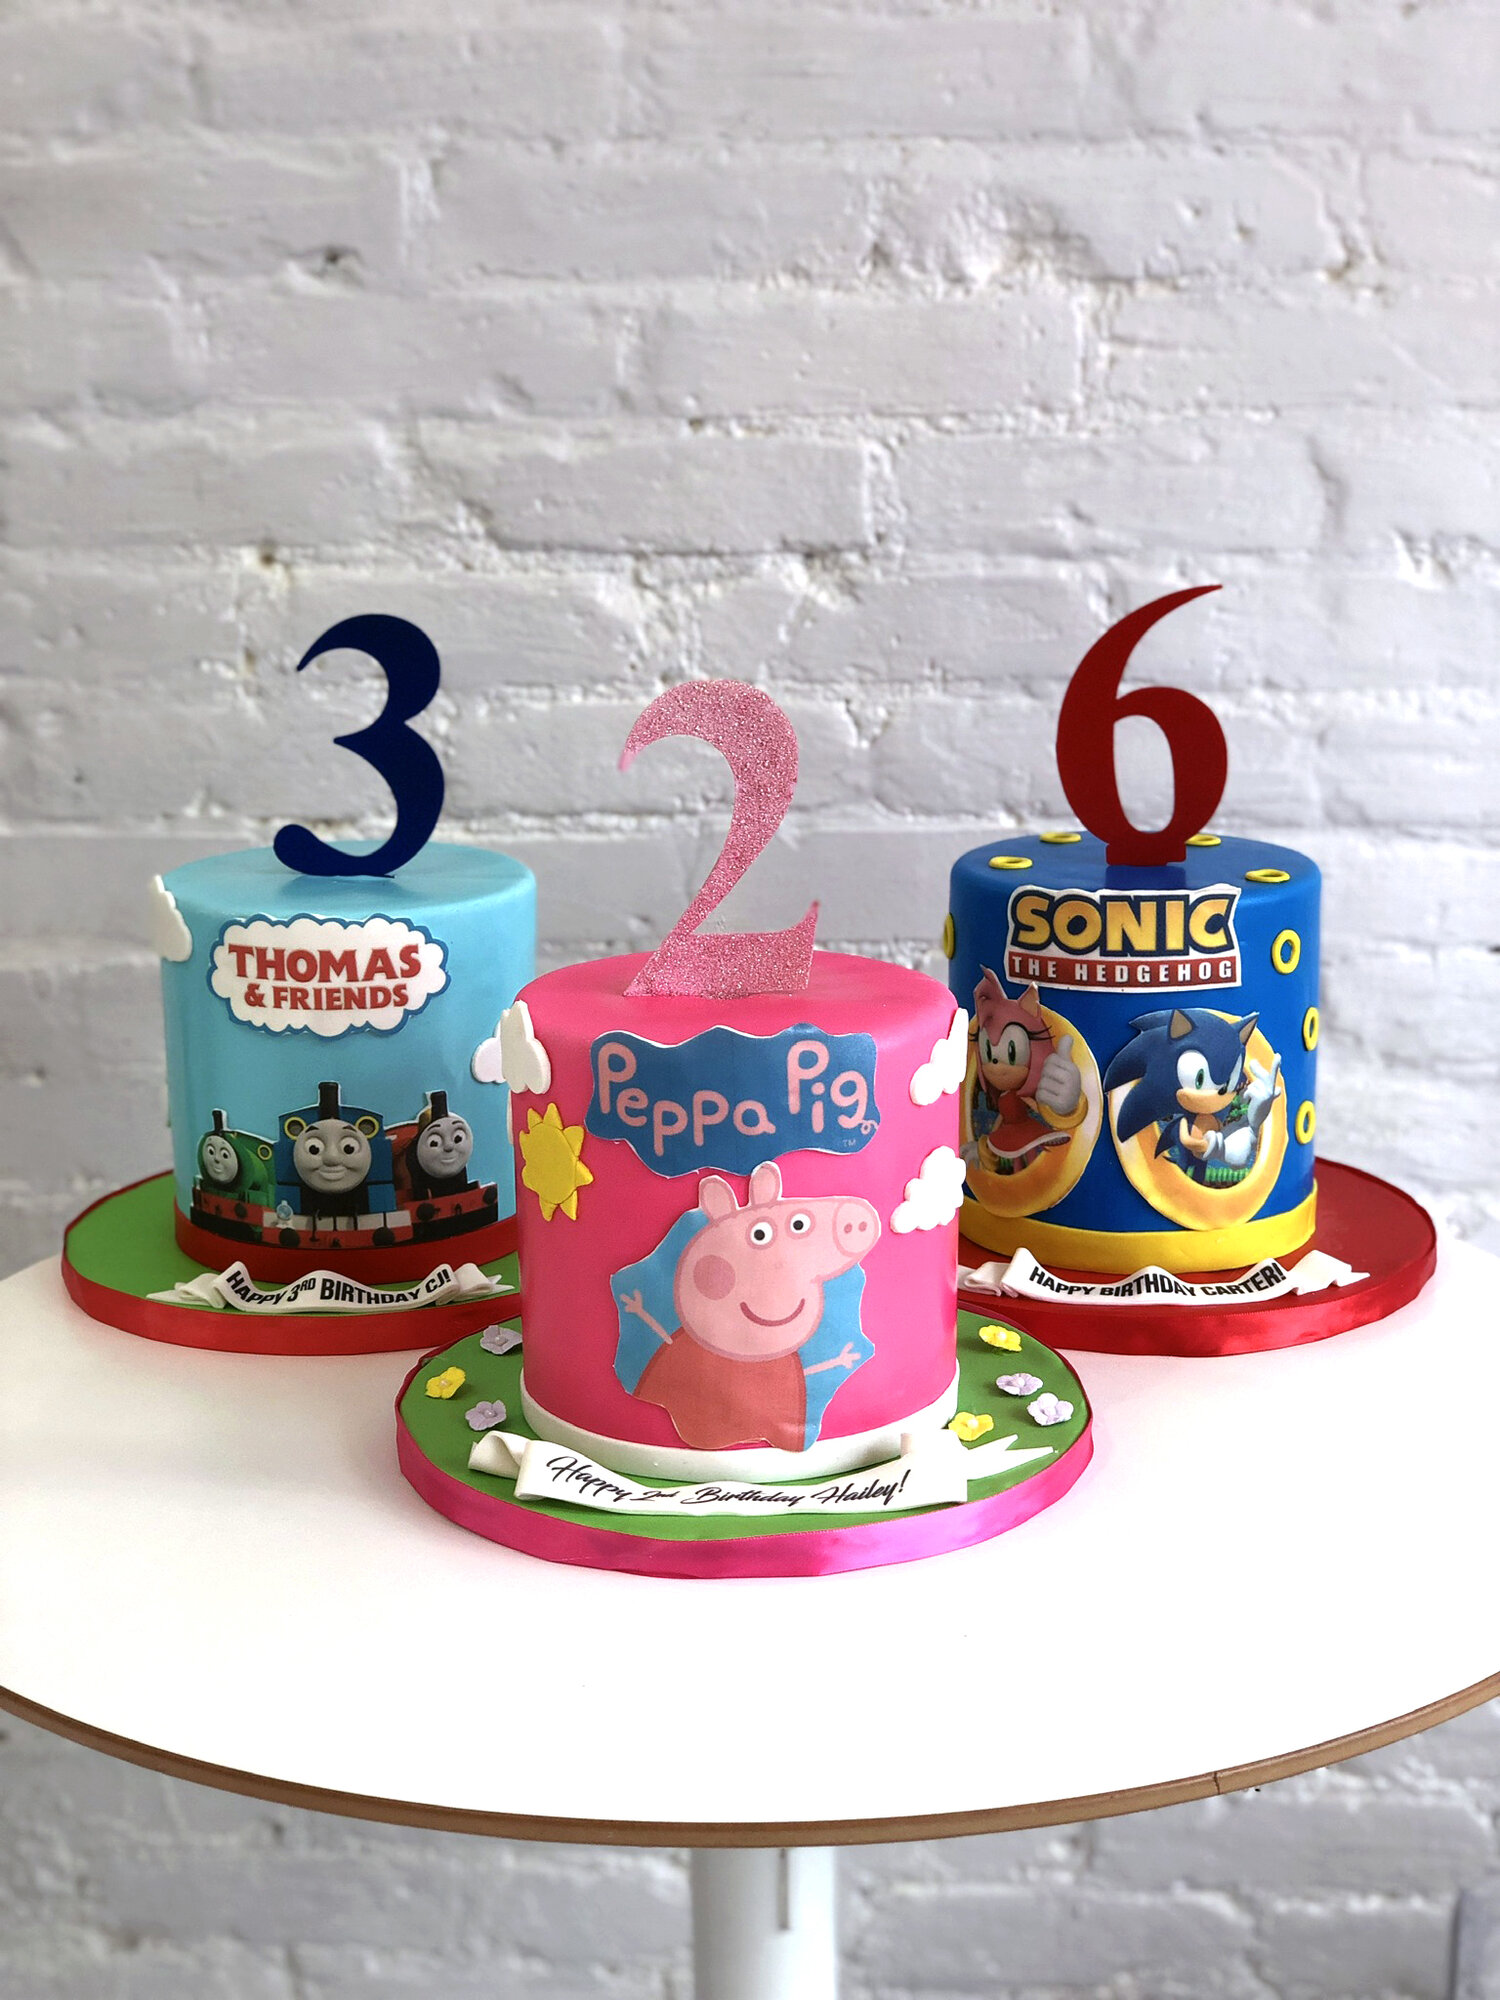 3 Cake Decorations for Sonic Cake Toppers Birthday Party Supplies